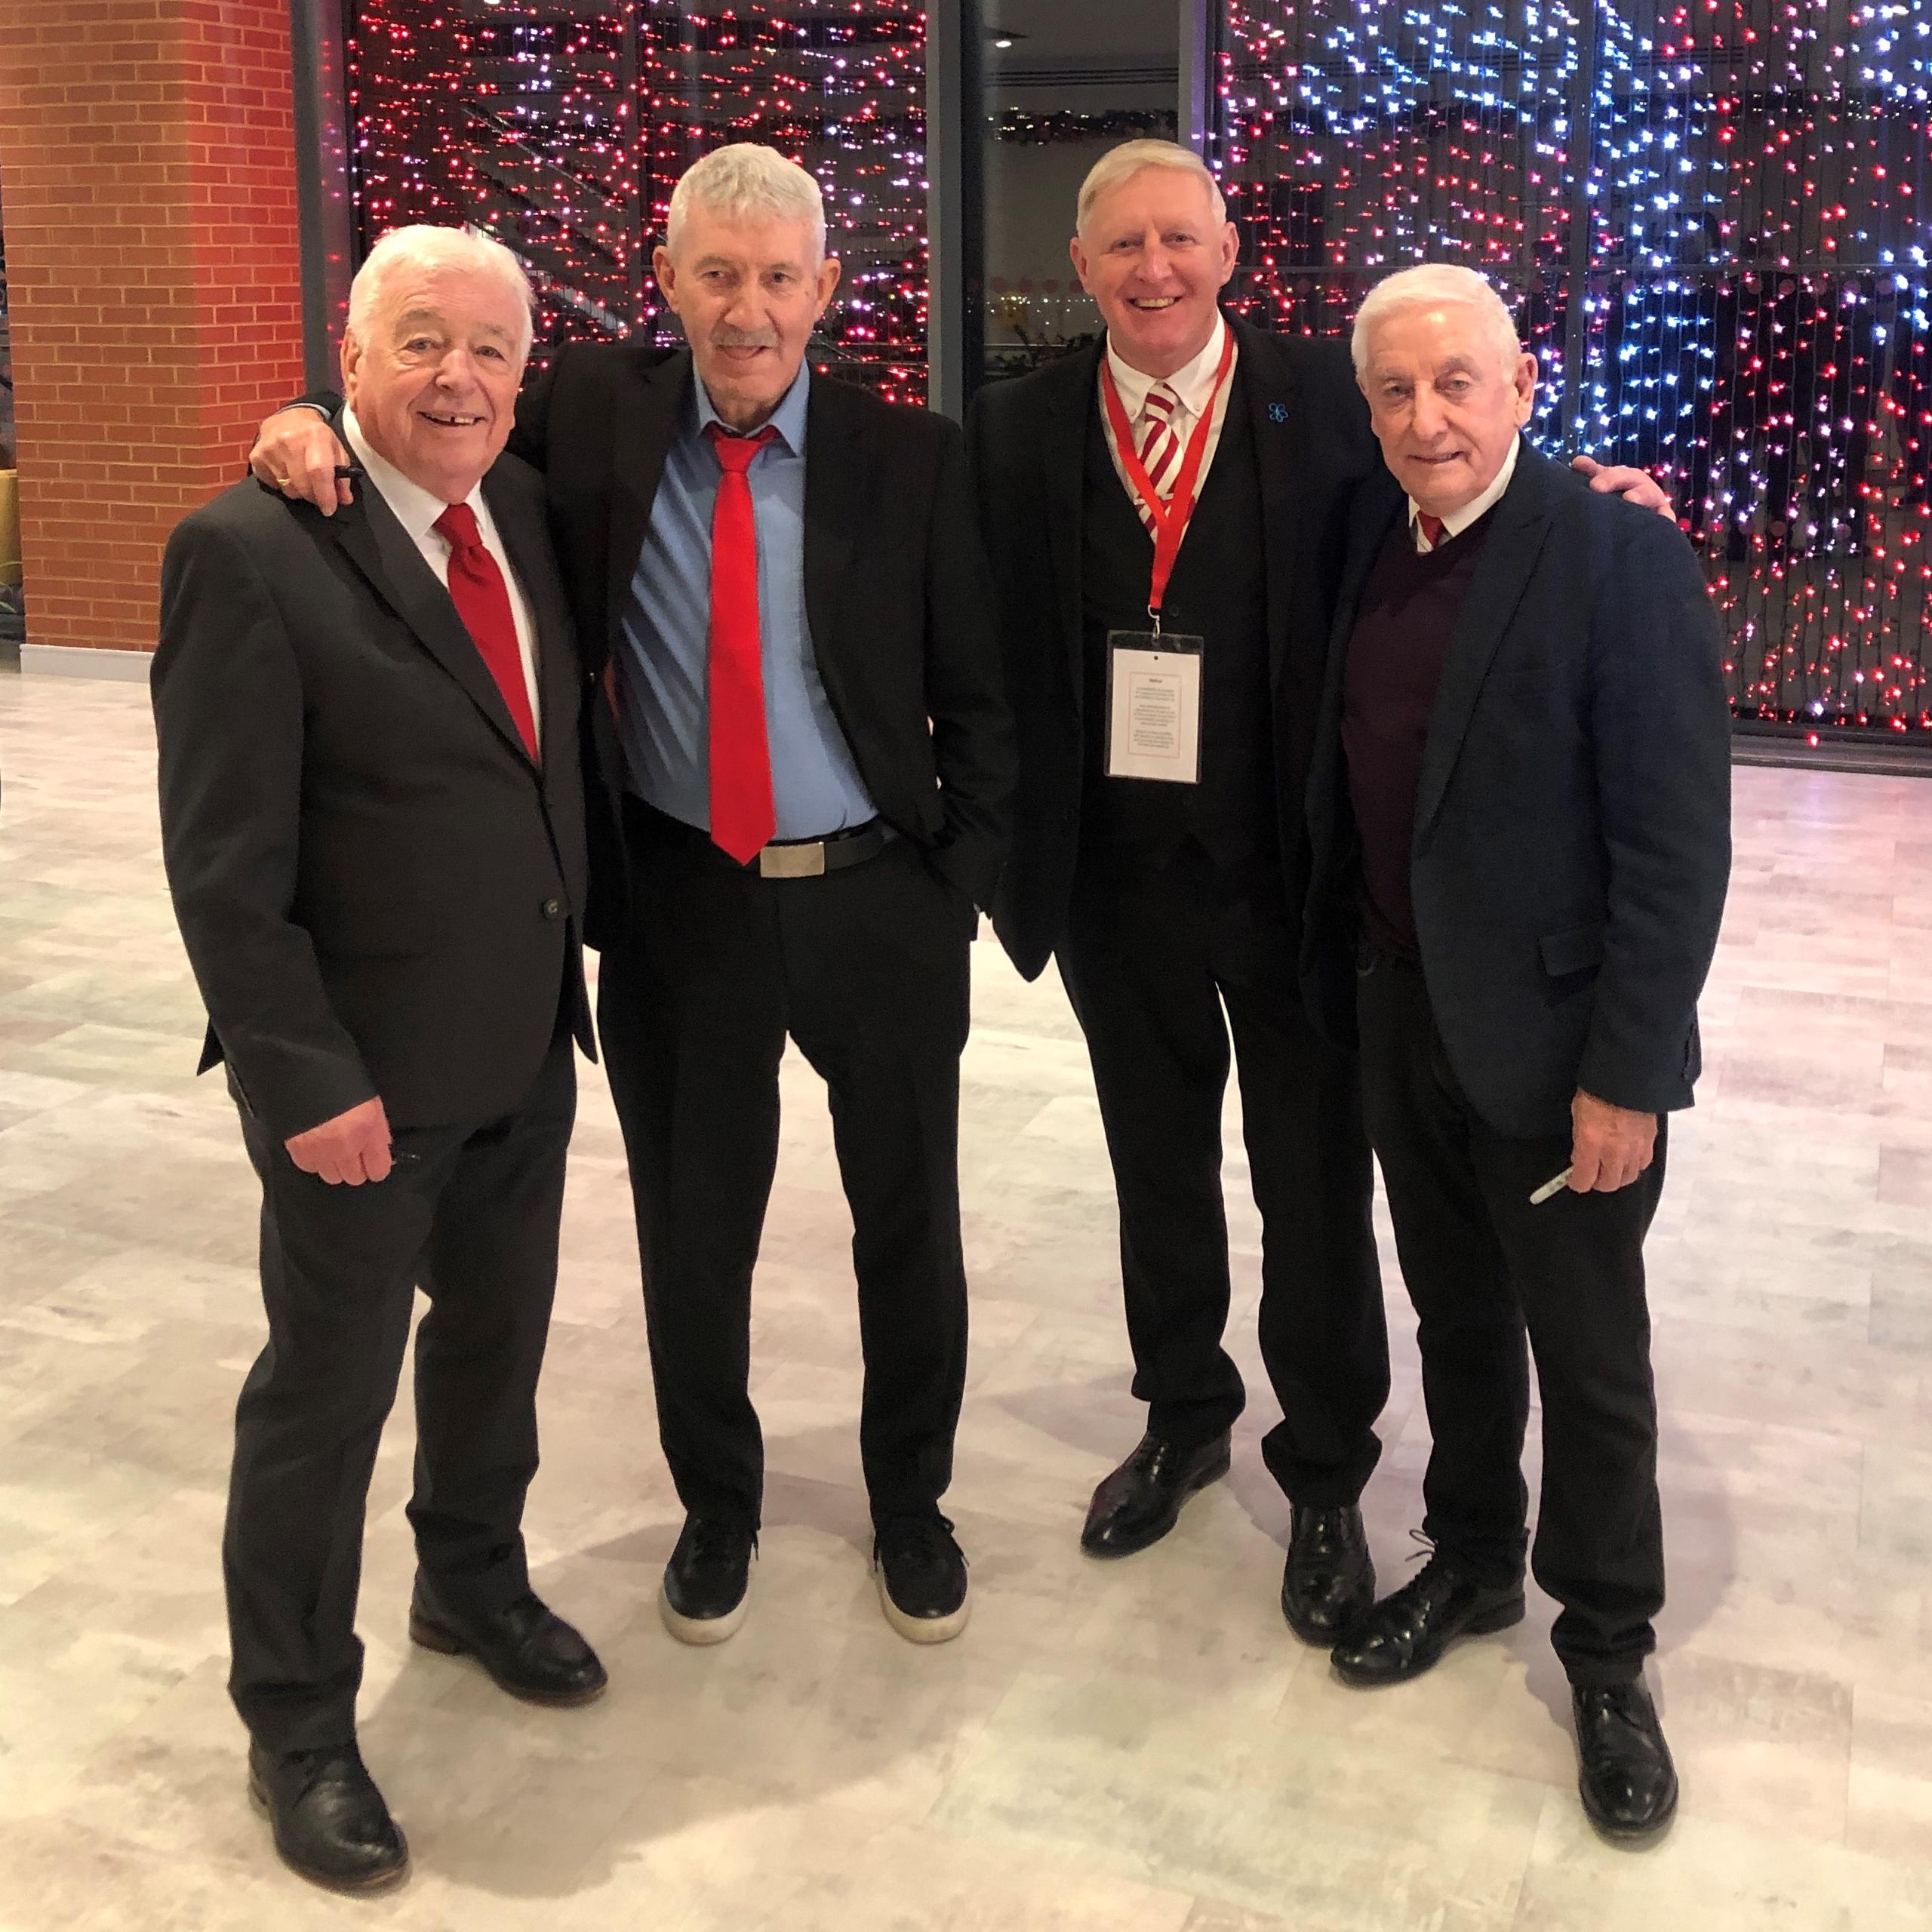 Lounge guests Ian Callaghan, Terry McDermott & Roy Evans 1st January 24